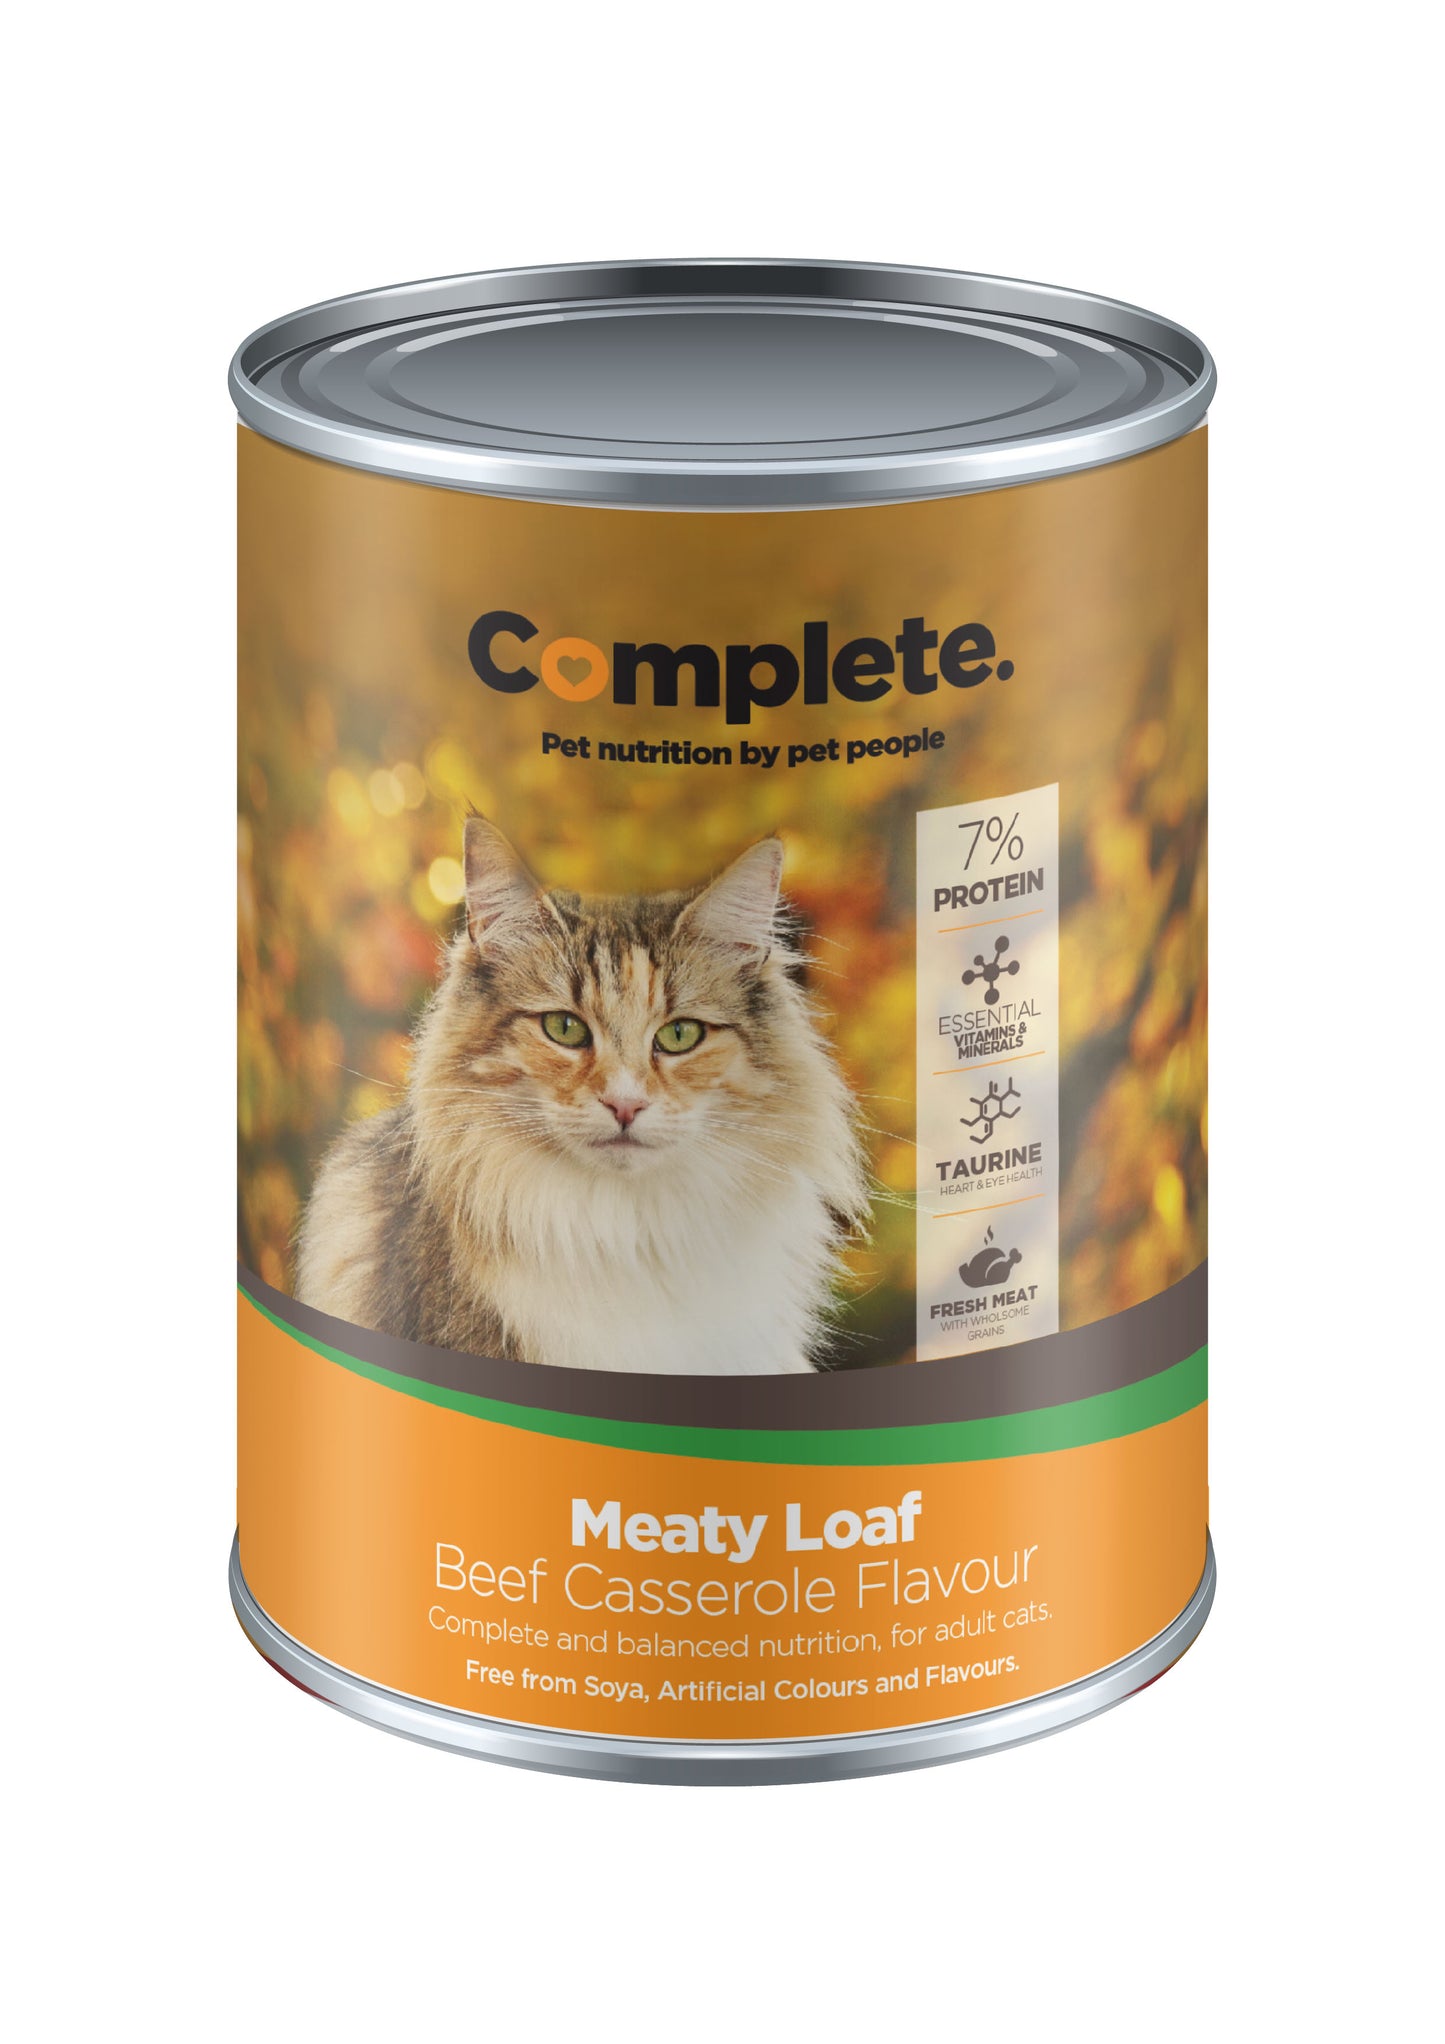 385g Complete Cat Wet Food Product image2 from Pets Planet - South Africa’s No.1 ePet Store for premium pet products, online pet shopping, best pet store near me, pet food, cat food, dog wet food, cat wet food, dog treats, dog snacks, pet snacks, pet treats, dog biscuits, dog bed, dog beds, dog beds on sale, washable dog bed, takealot dog bed, plush dog bed, pet bed, iremia dog bed, pet store Olivedale, pet store Bryanston, Pet Store Johannesburg, Complete Pet Nutrition, Complete pet nutrition dog food